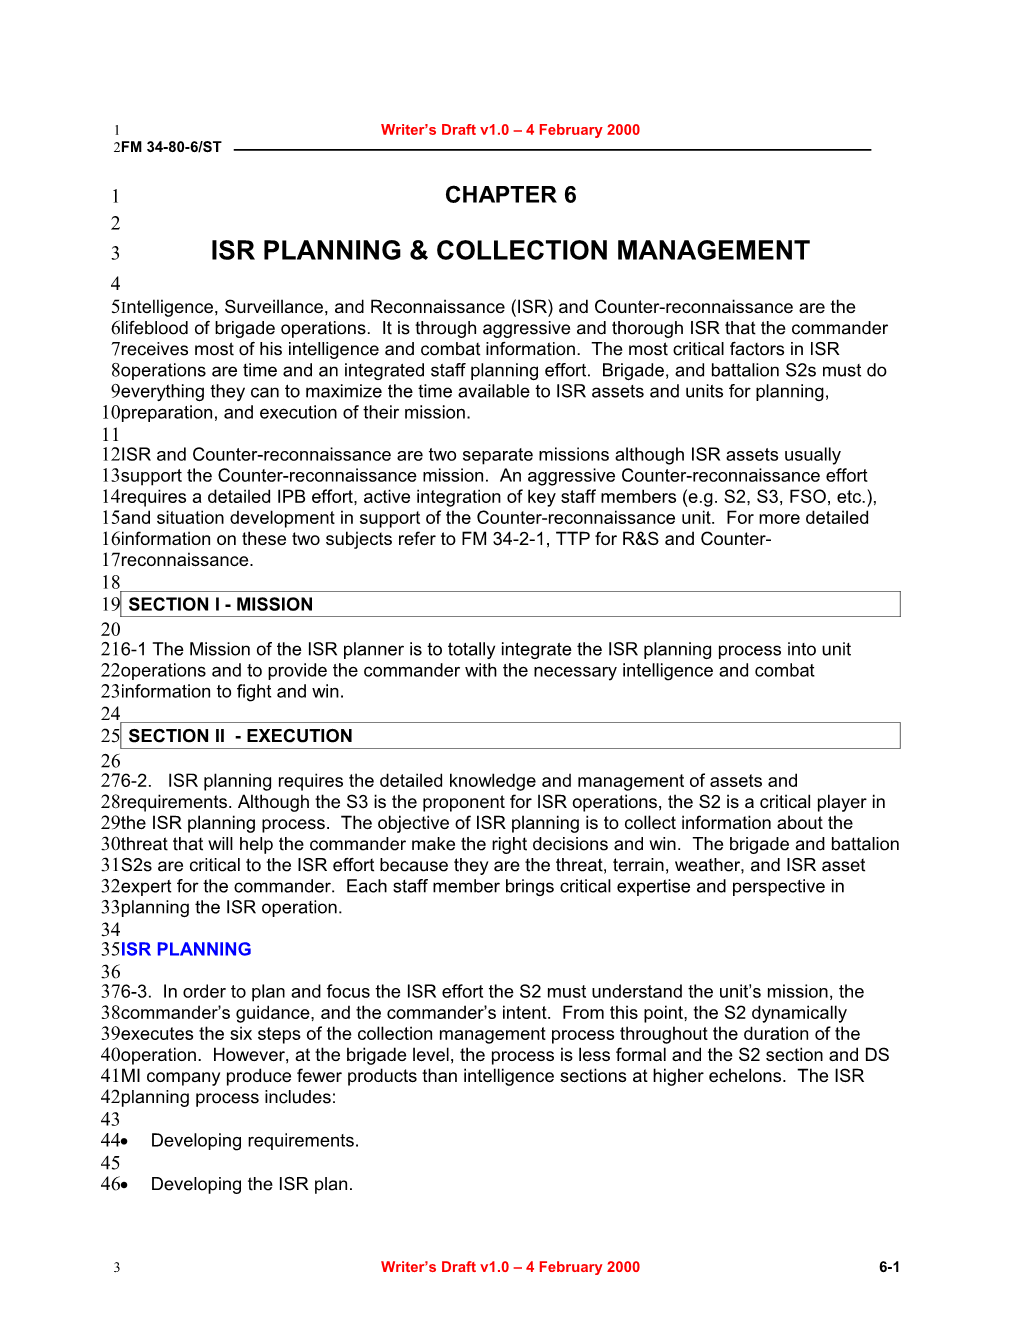 Isr Planning & Collection Management